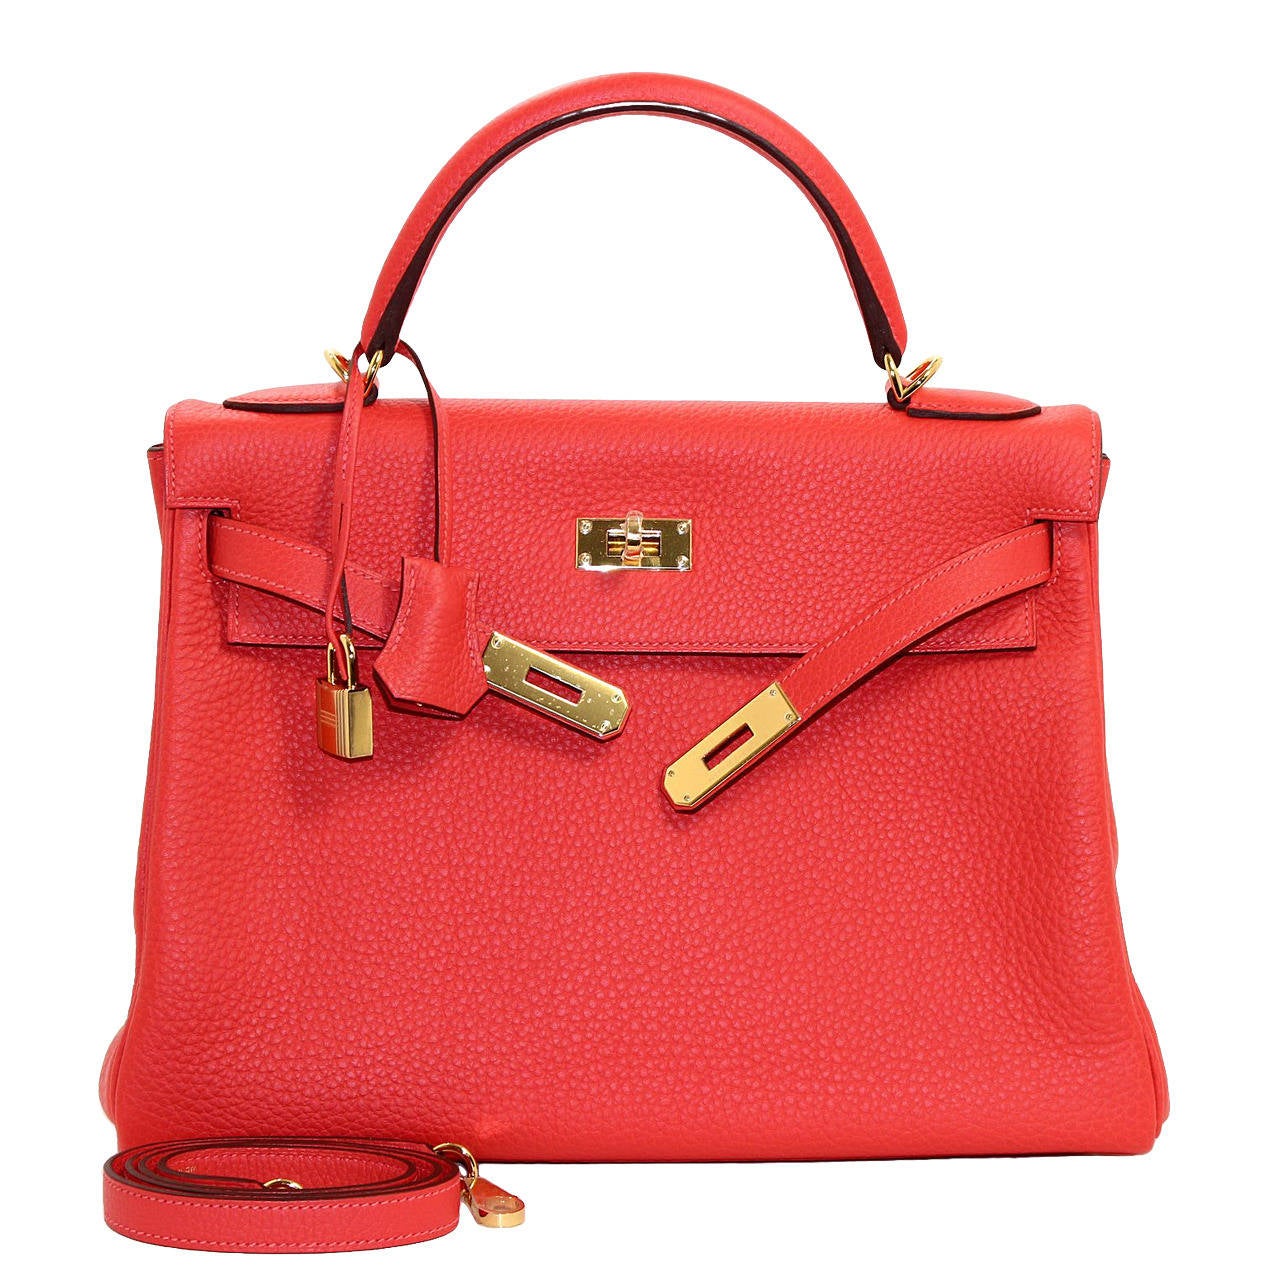 Hermes Kelly Bag in Rouge Pivoine Clemence Red Leather, GHW, 32 cm size at 1stdibs